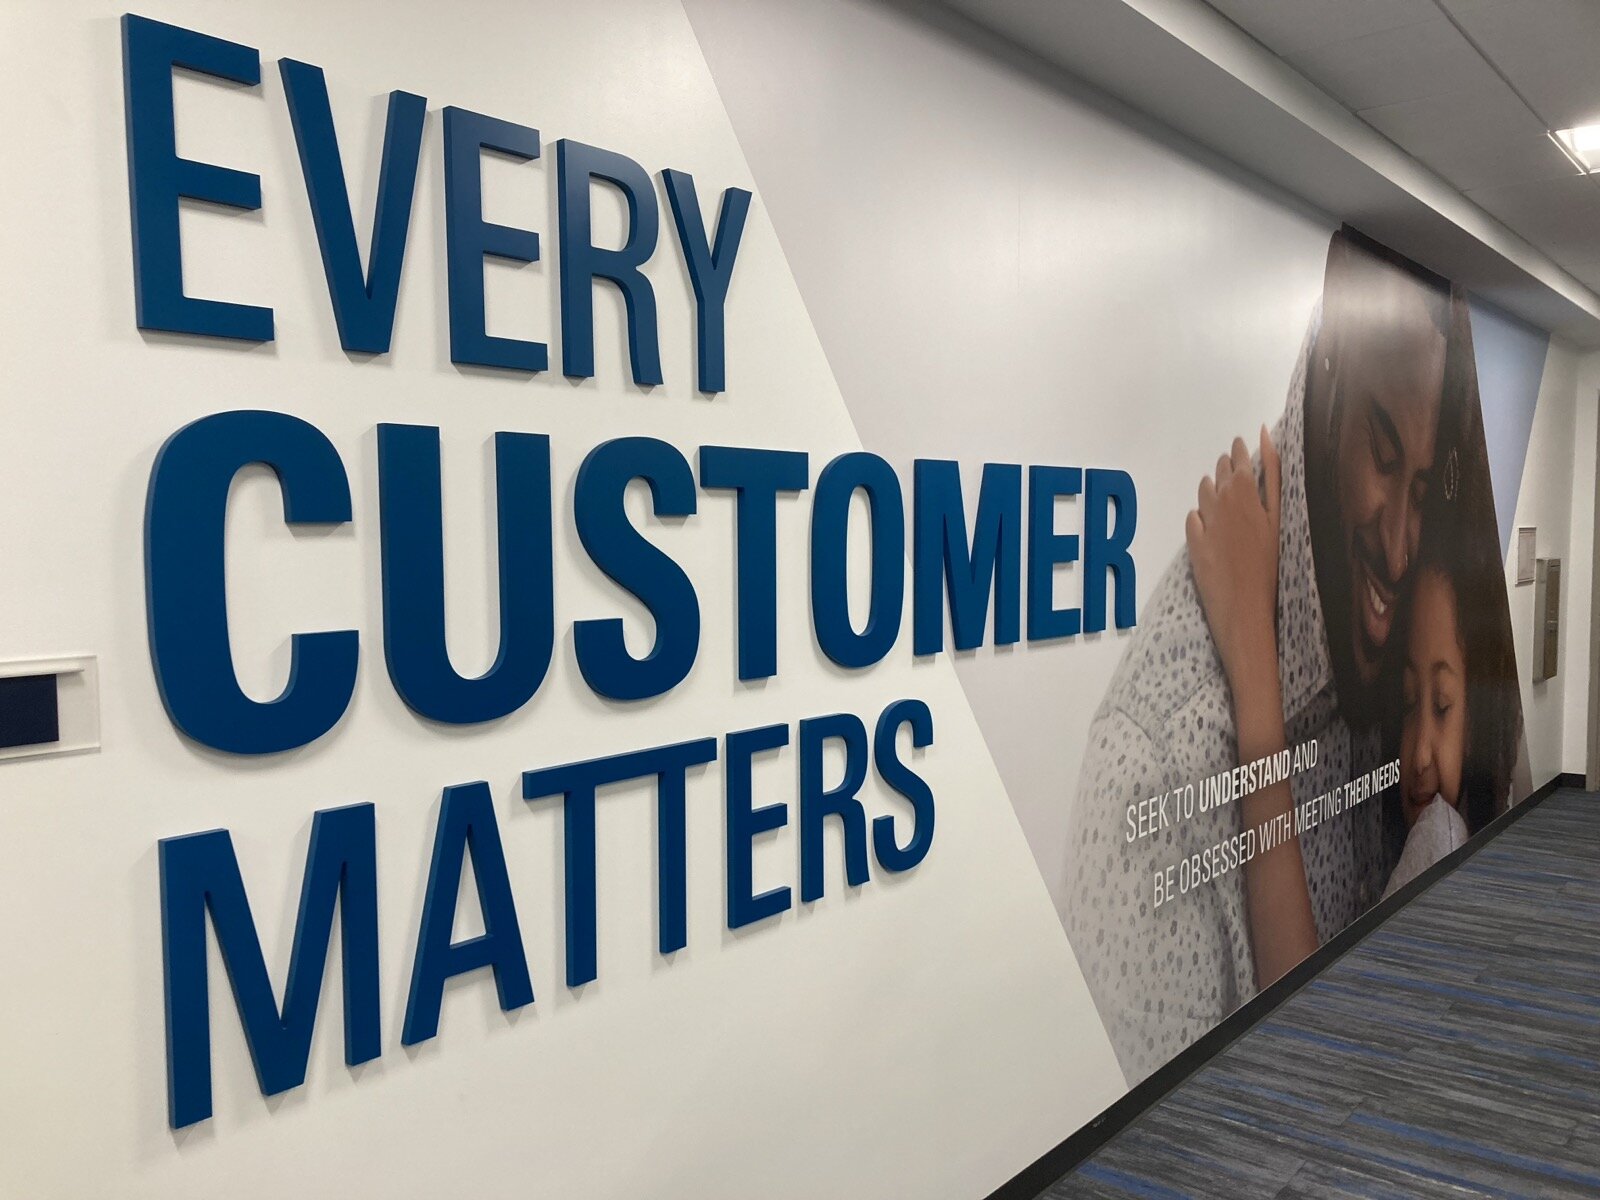 Wall display in a hospital reading, "Every customer matters"